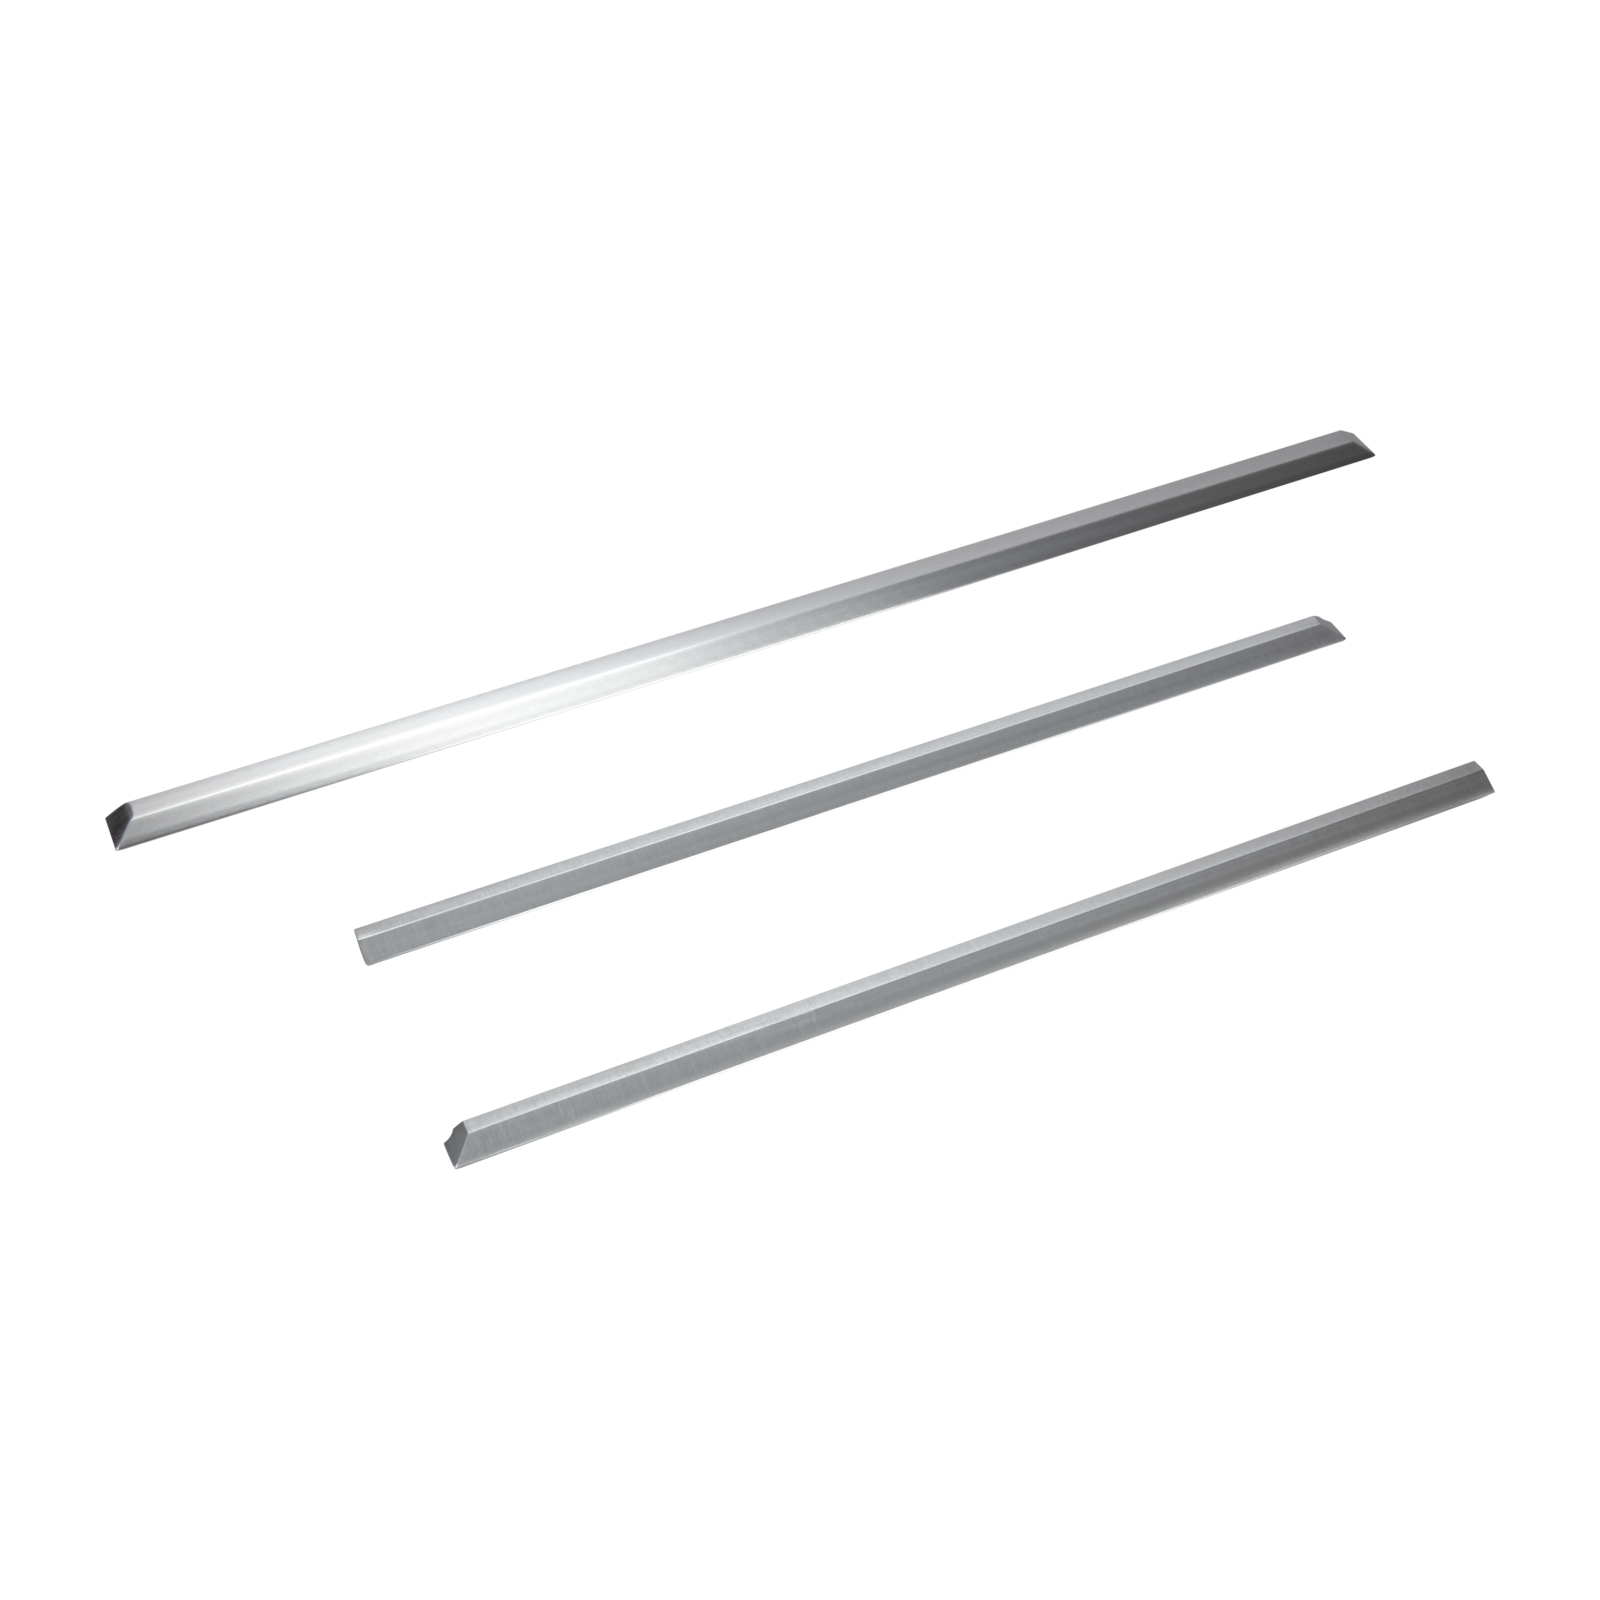 Whirlpool -  Cooktop Add-On Range Trim Kit in Stainless - W10675028